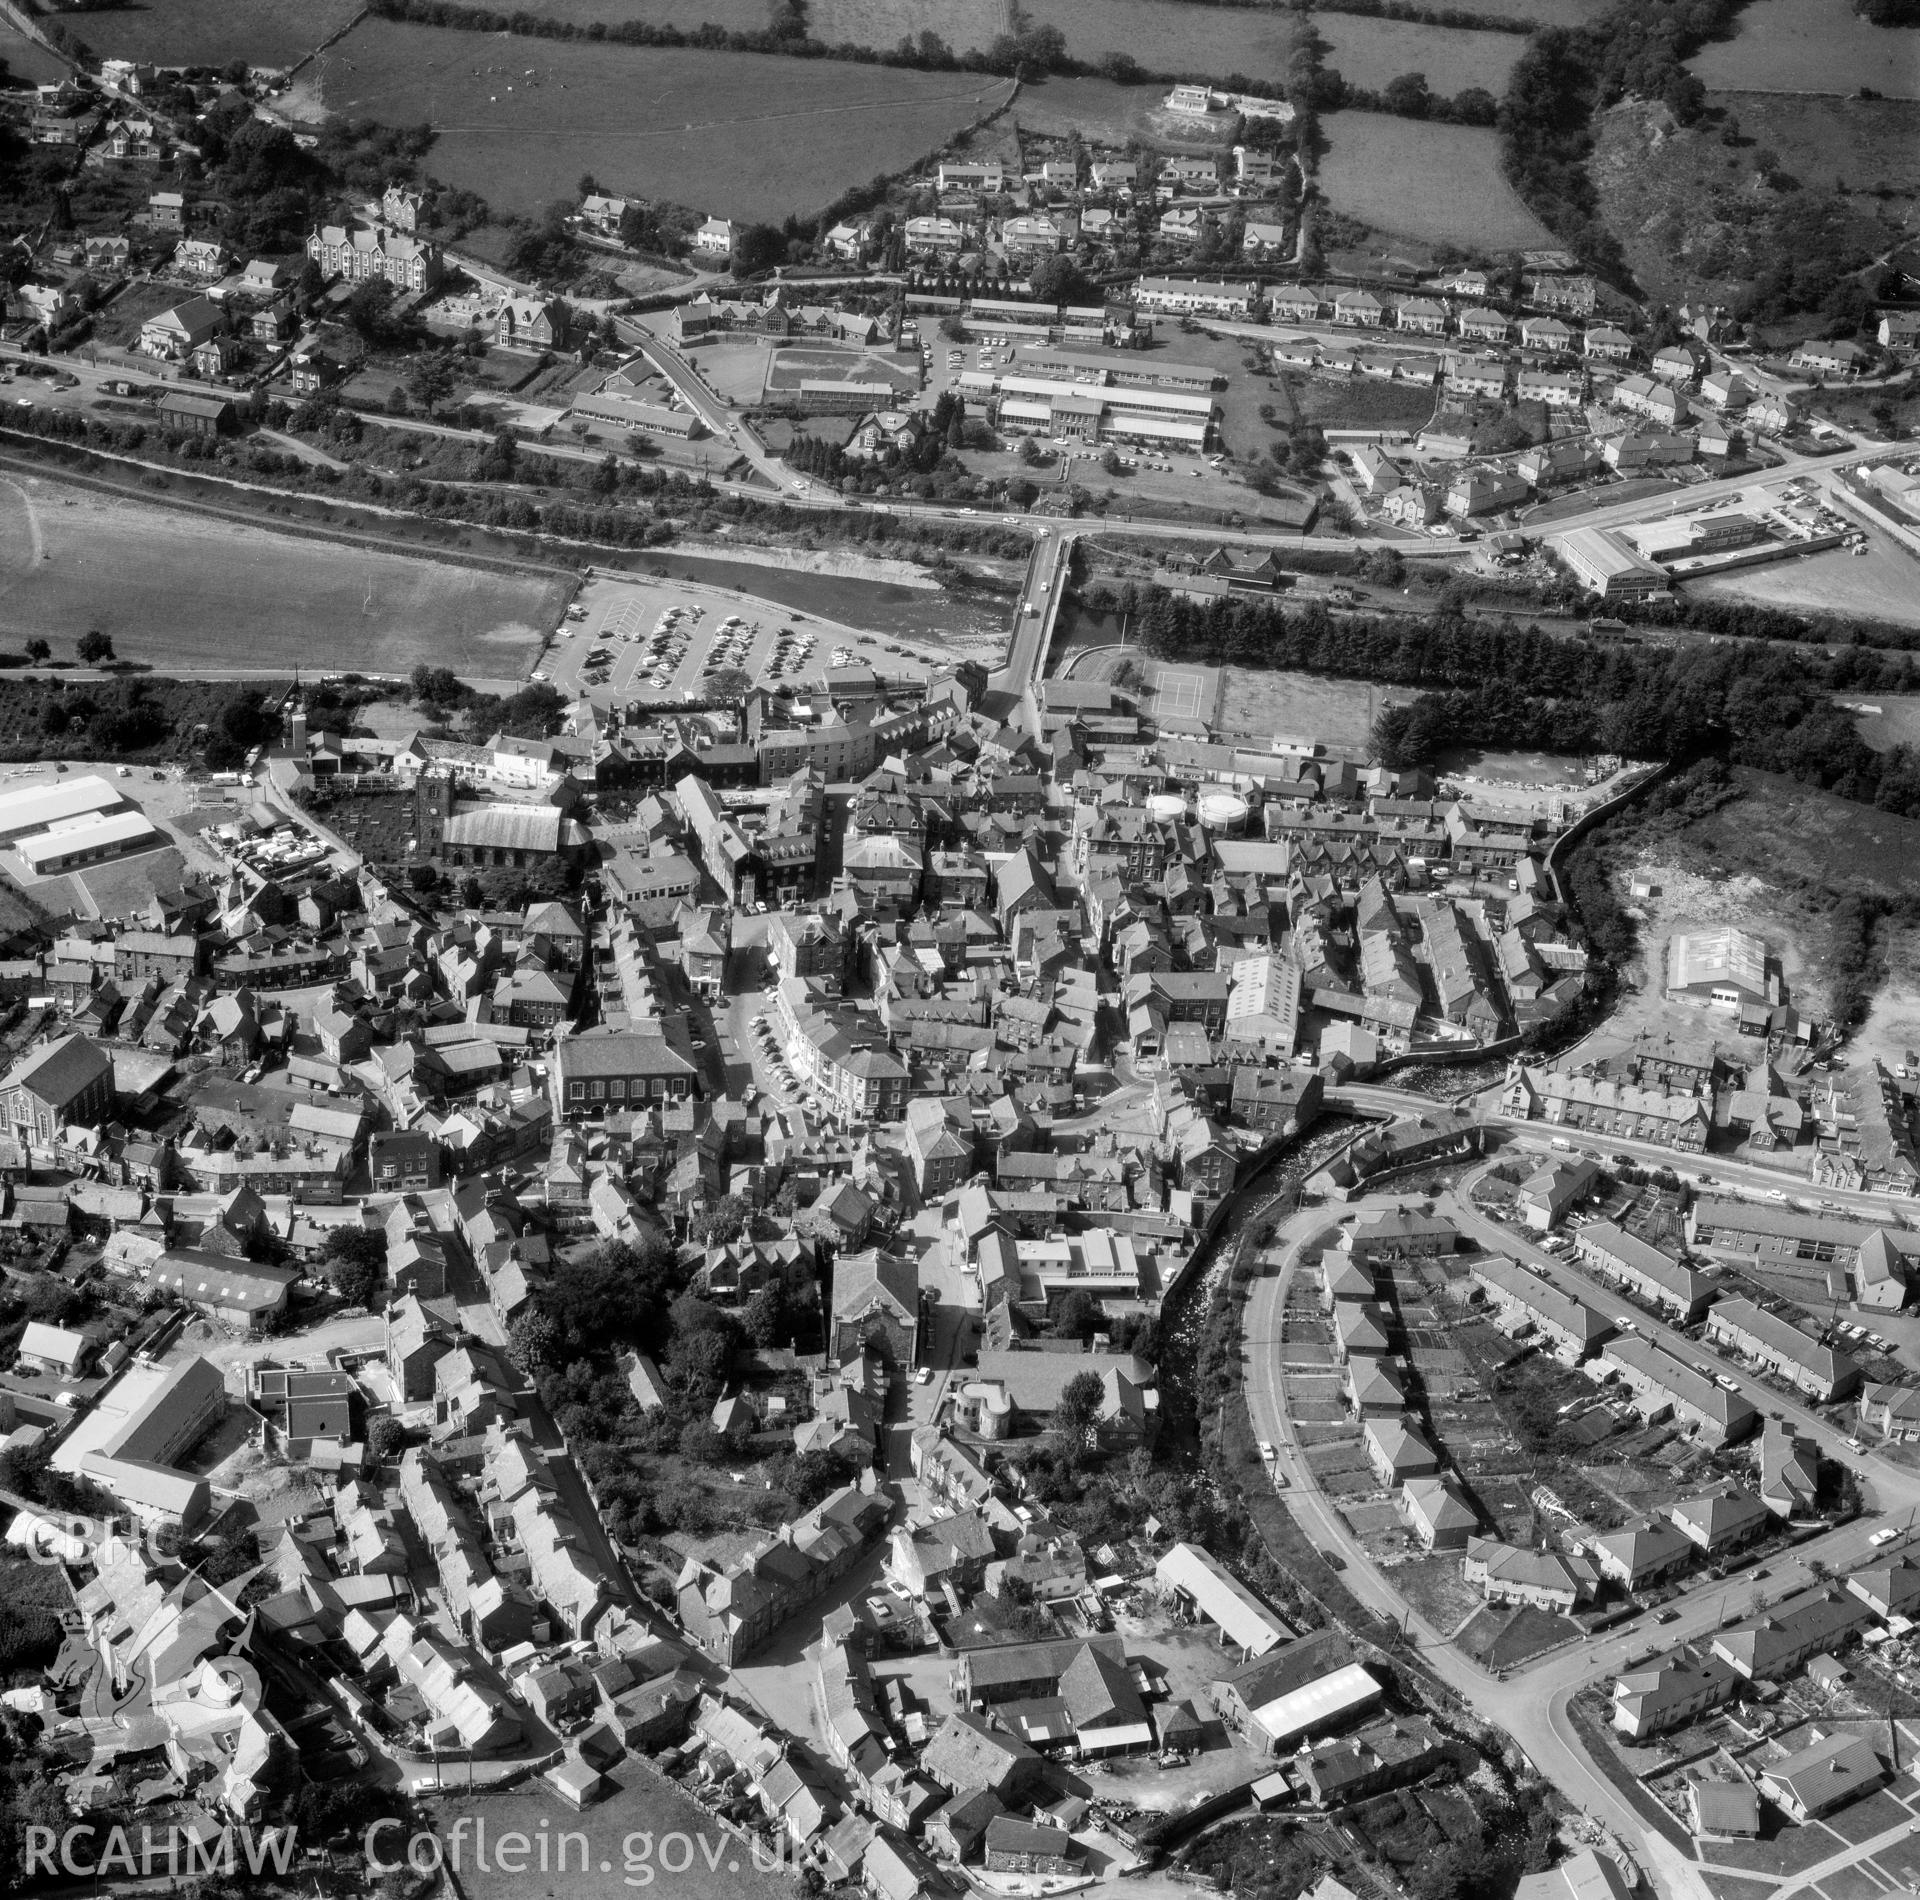 Black and white oblique aerial photograph showing Dolgellau, view of the town looking north, from Aerofilms album Merionethshire and Montgomeryshire, taken by Aerofilms Ltd and dated 1974.